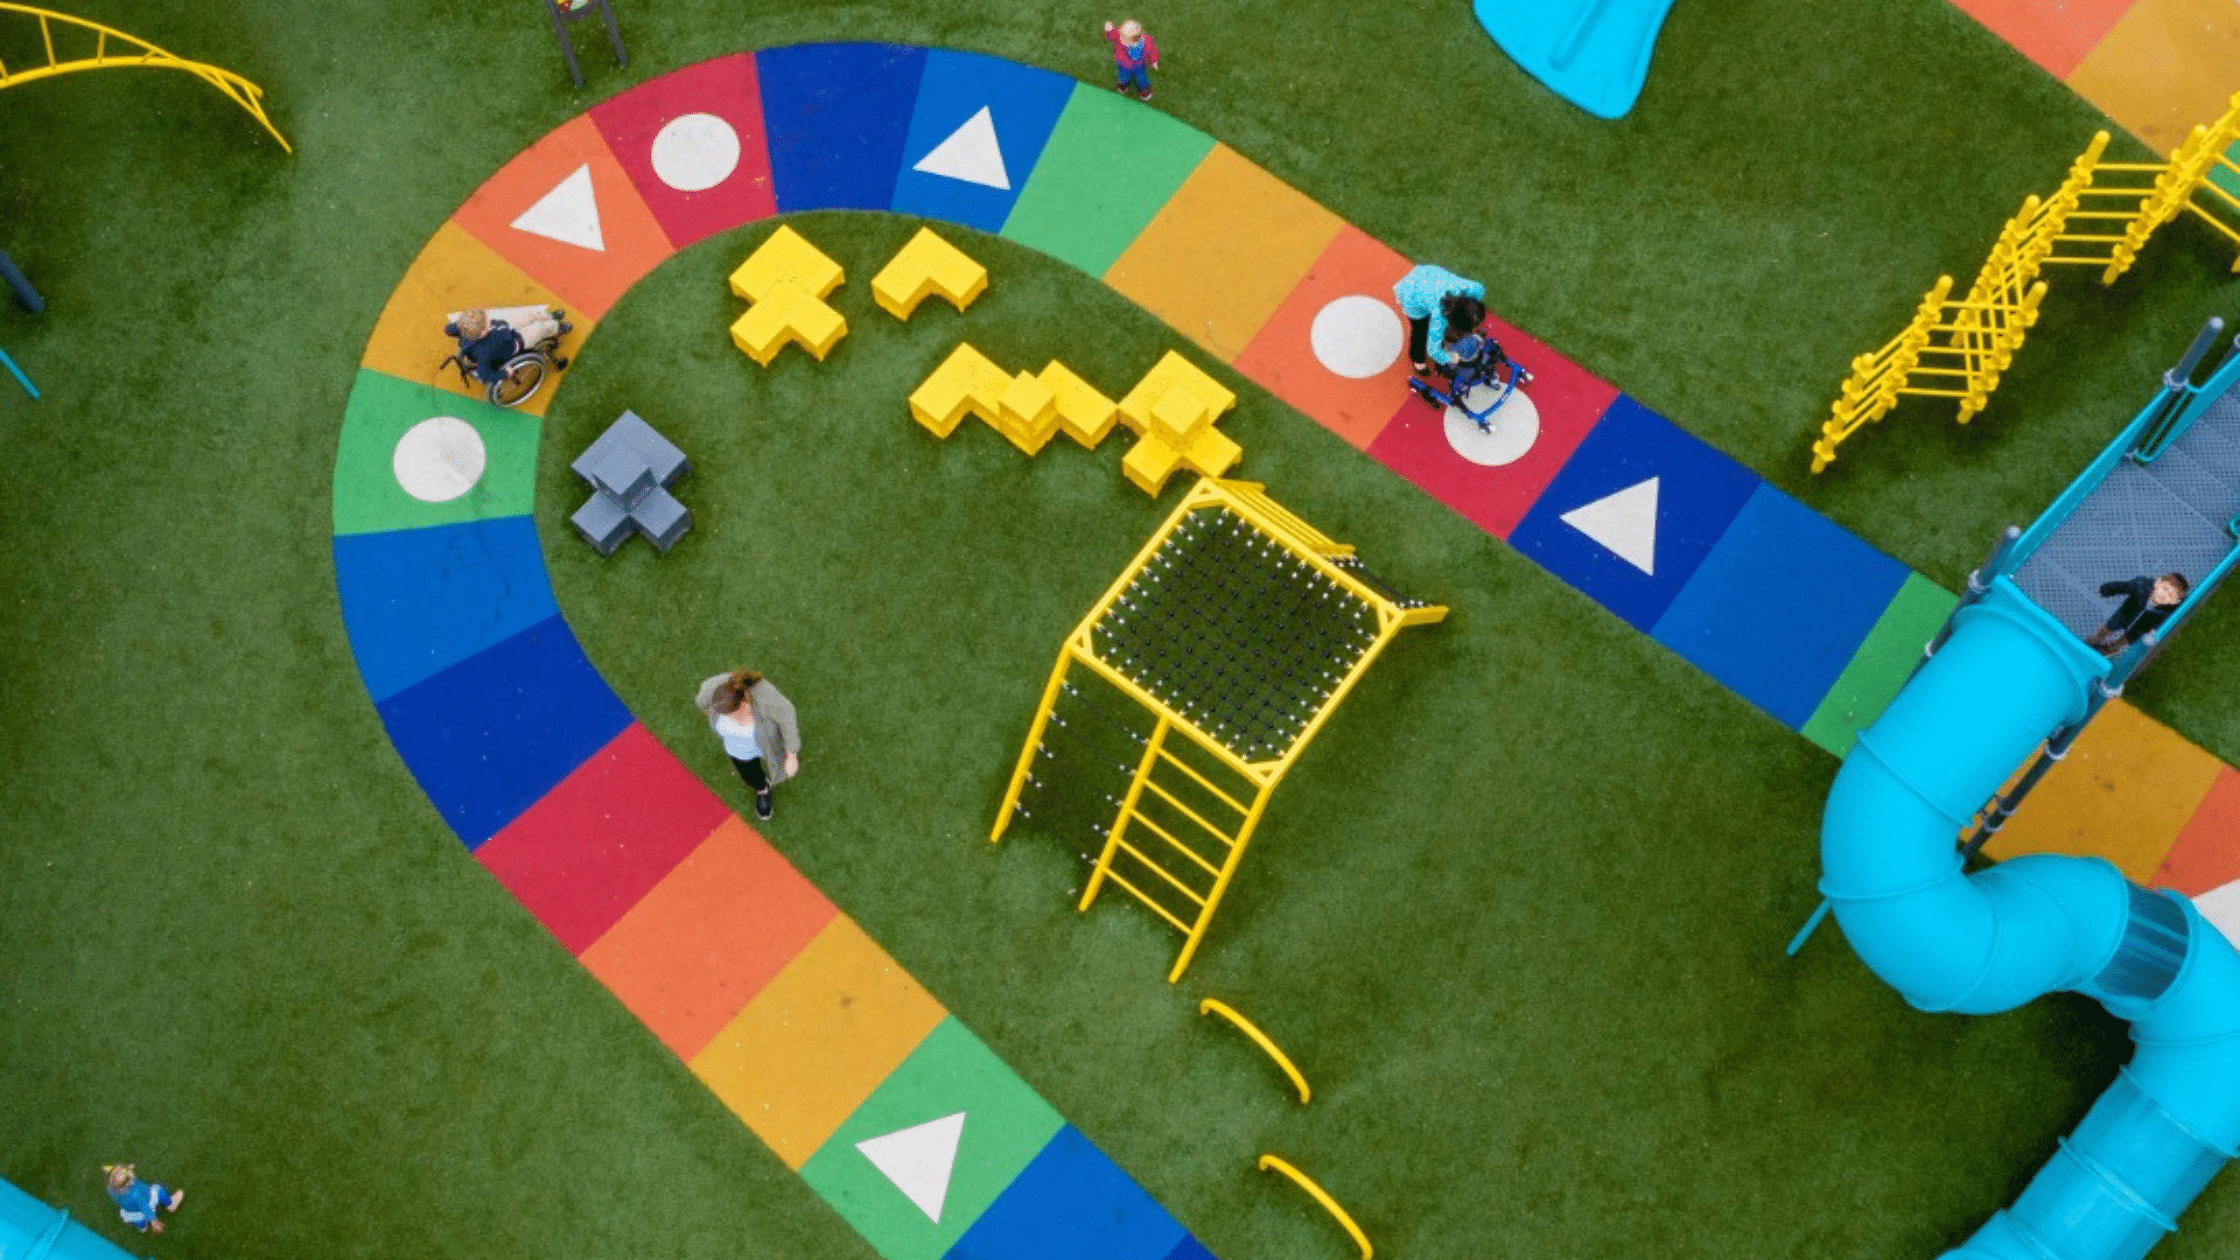 colorful playground surfacing - Psychology of Color